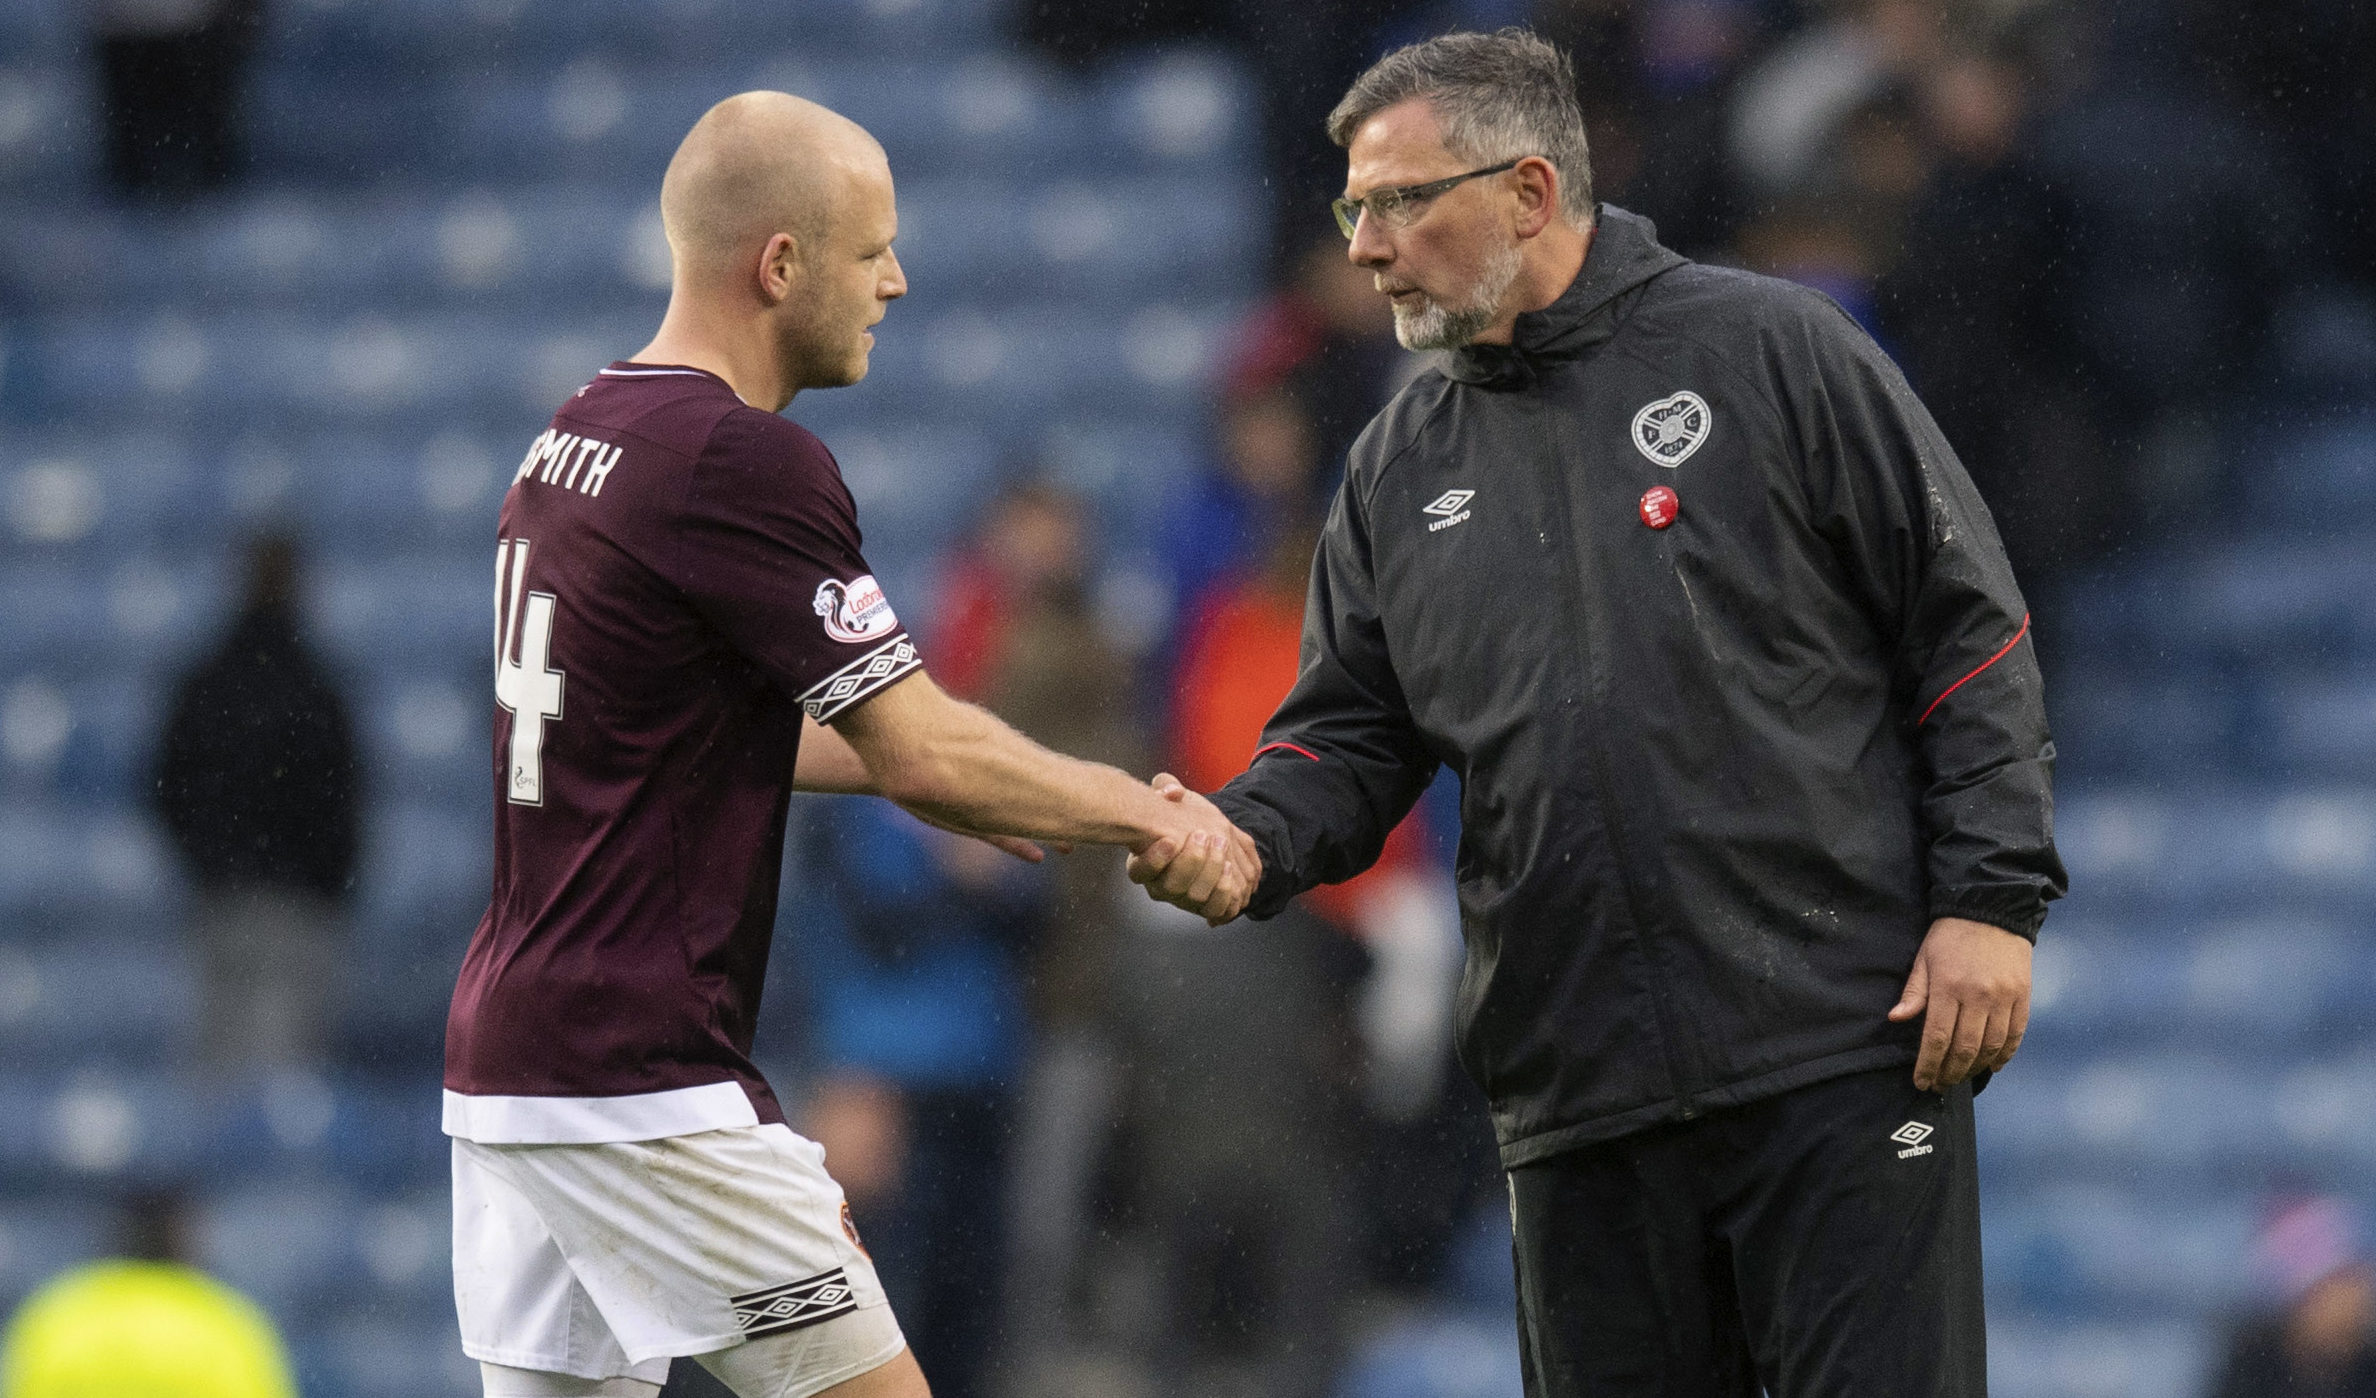 Steven Naismith (L) with Craig Levein at full-time.